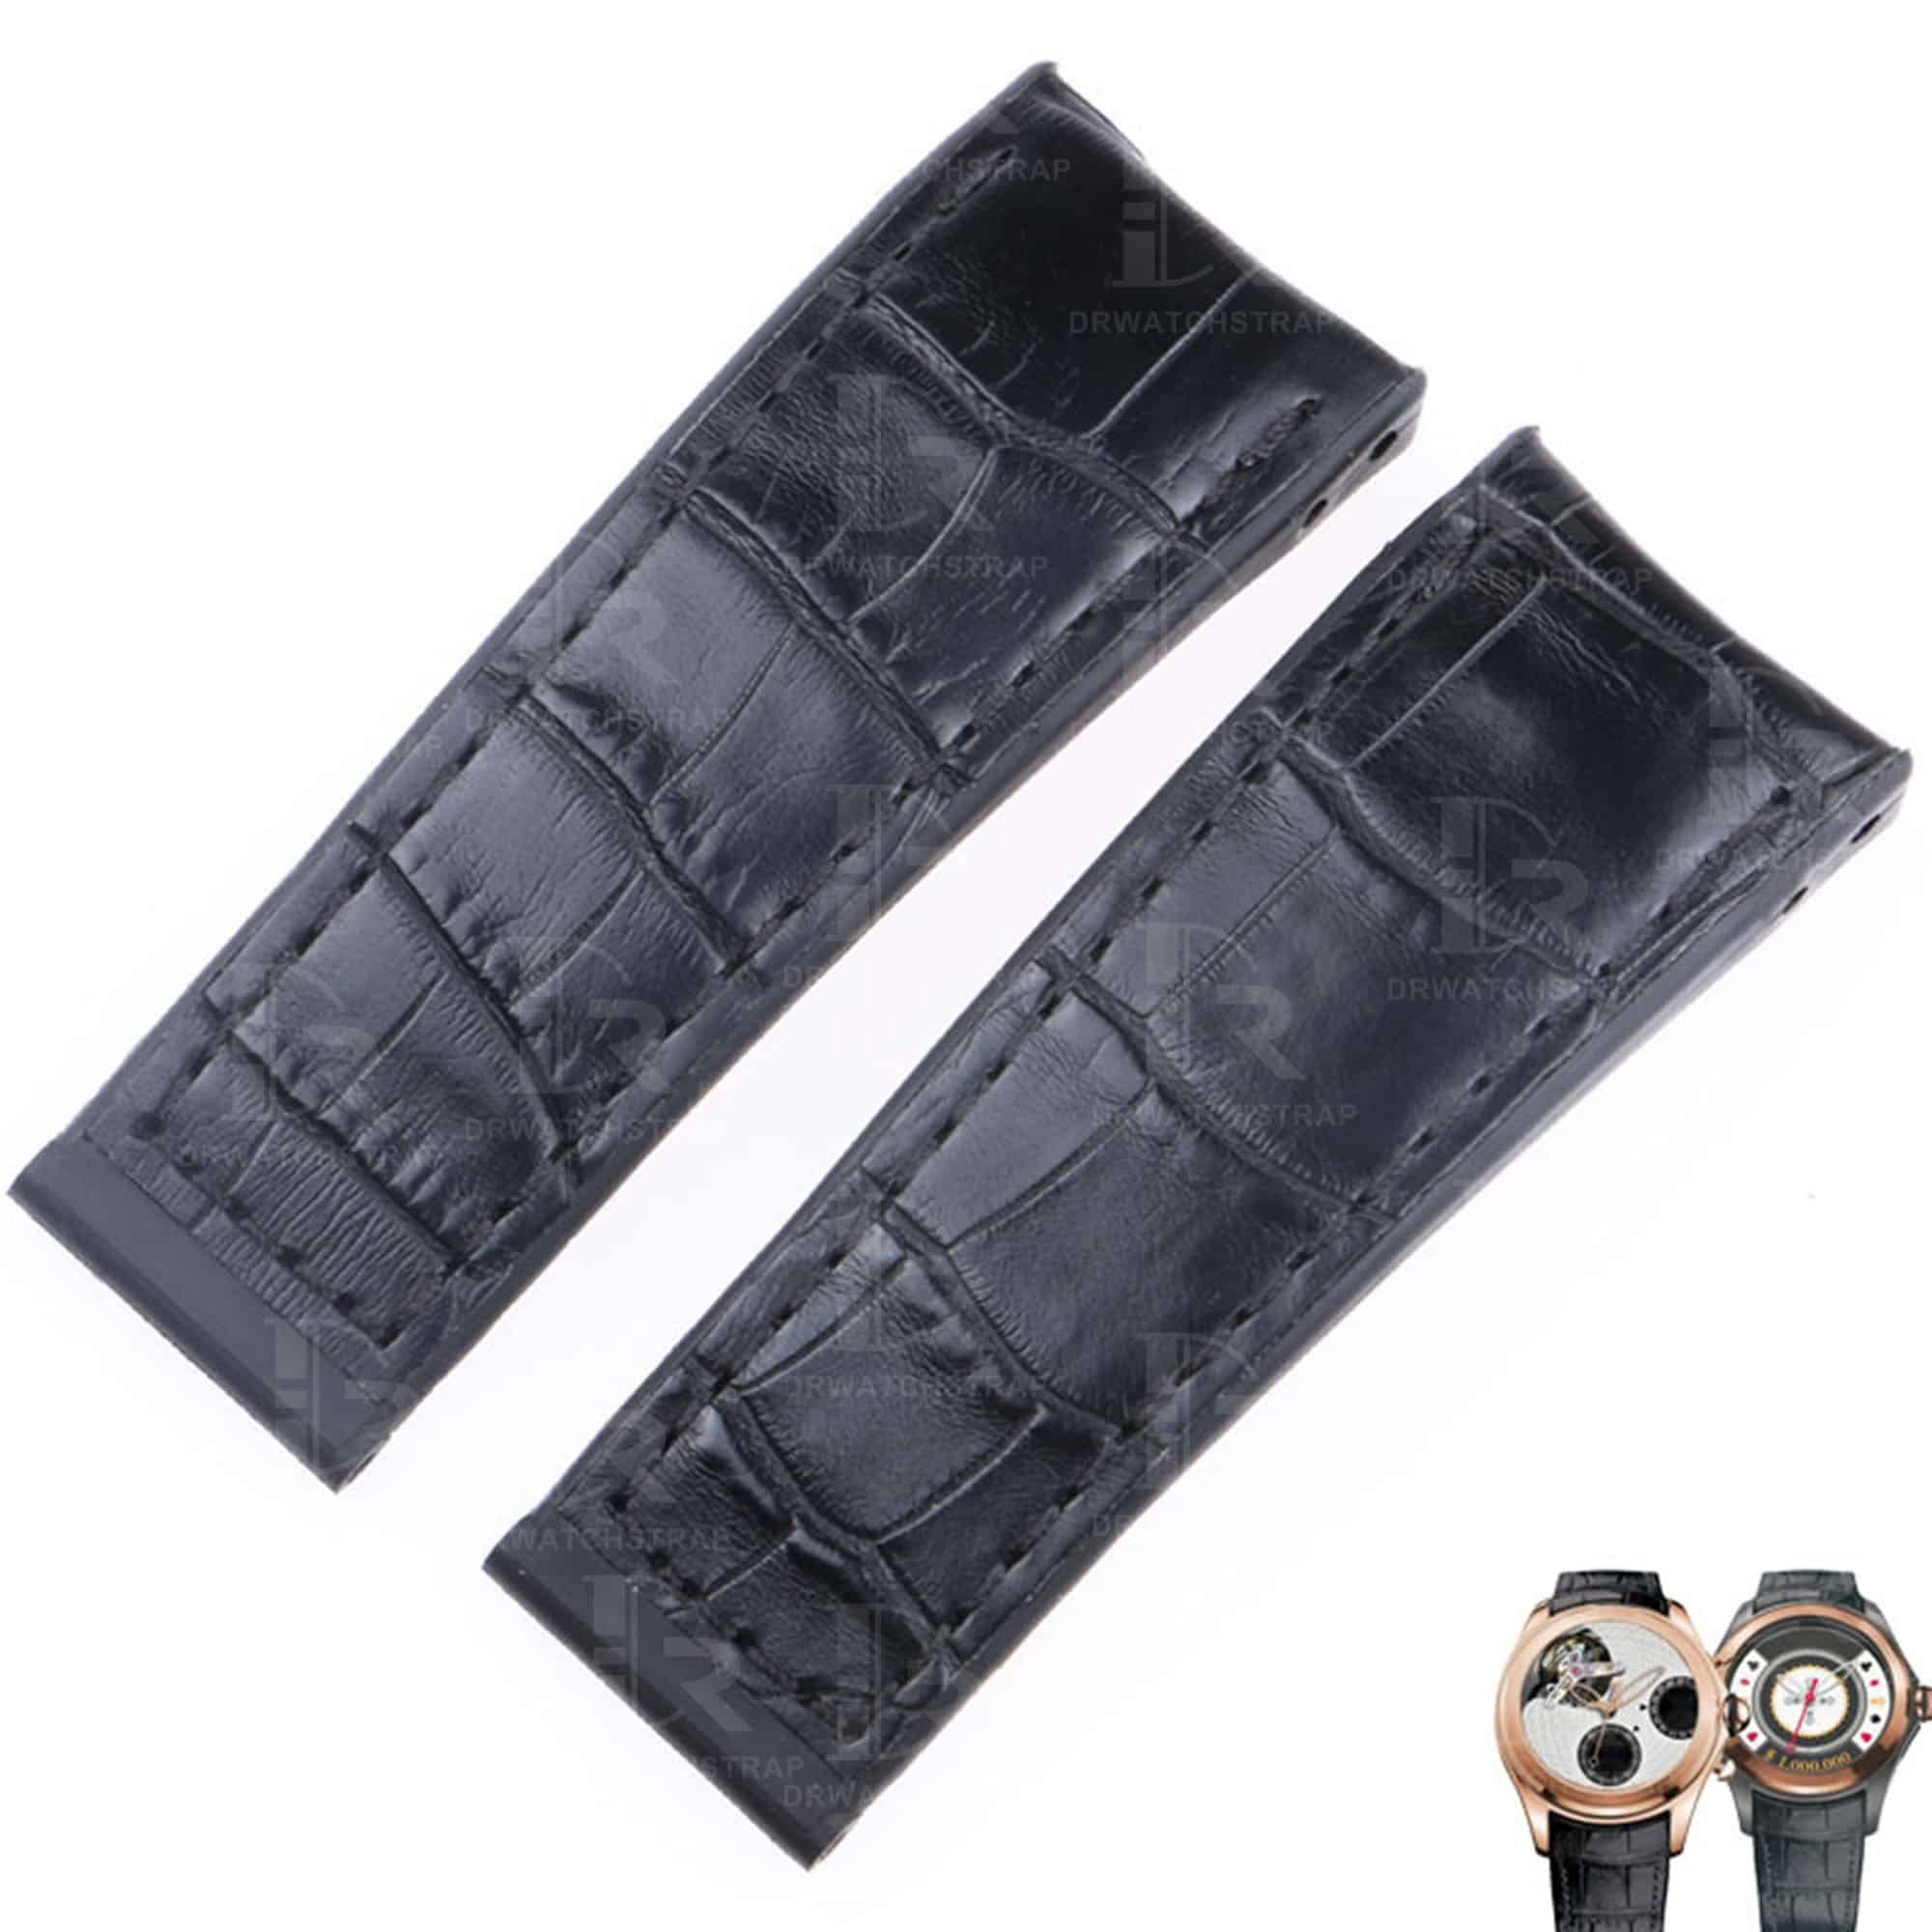 Curved-end custom black alligator leather watch bands for Corum Bubble Casino straps for sale